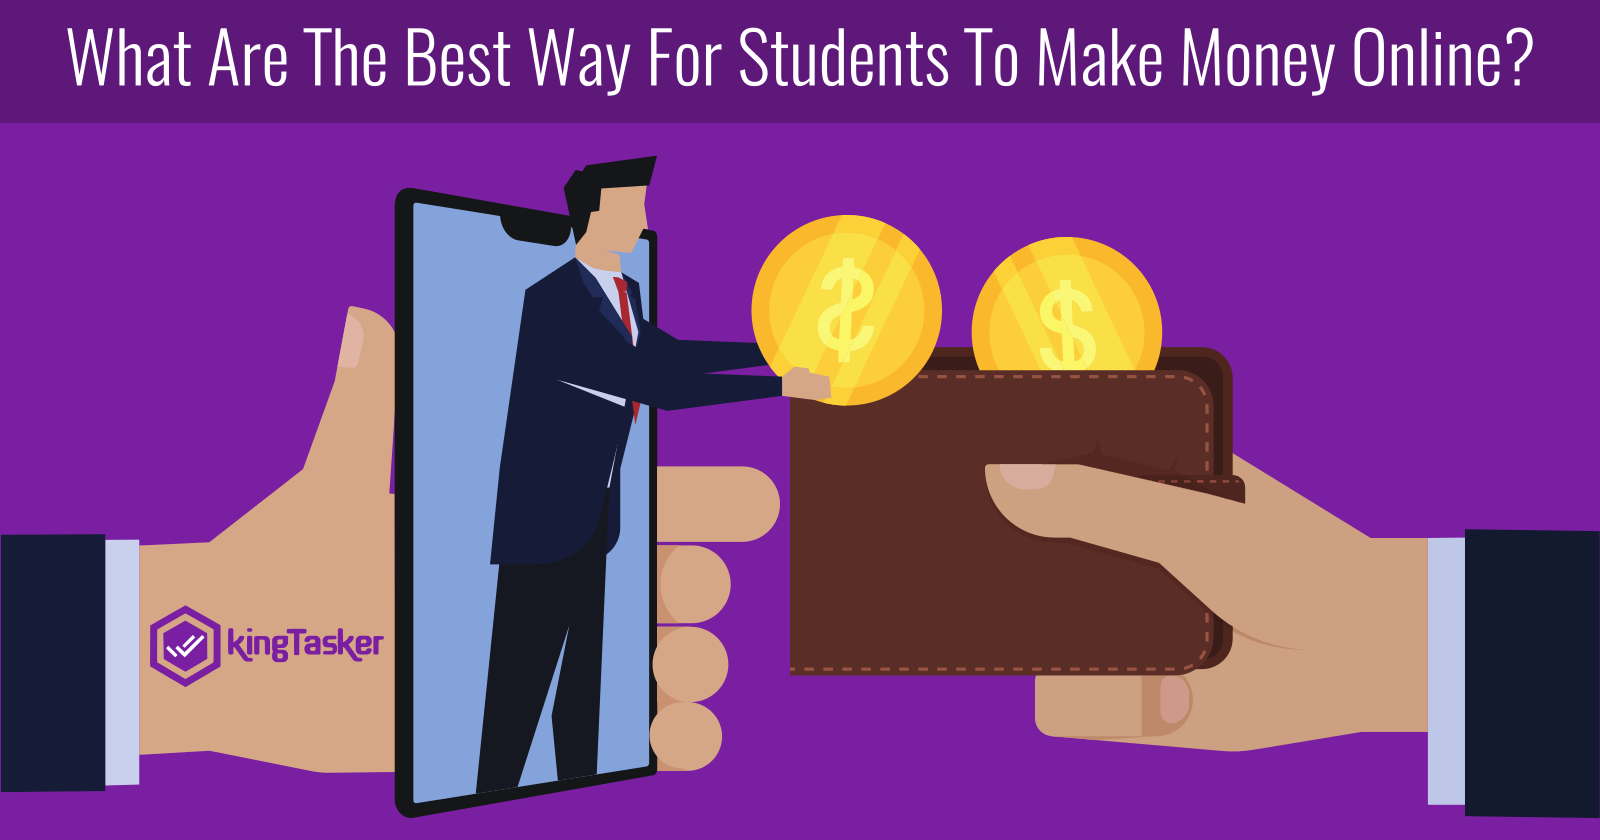 What Are The Best Way For Students To Make Money Online?